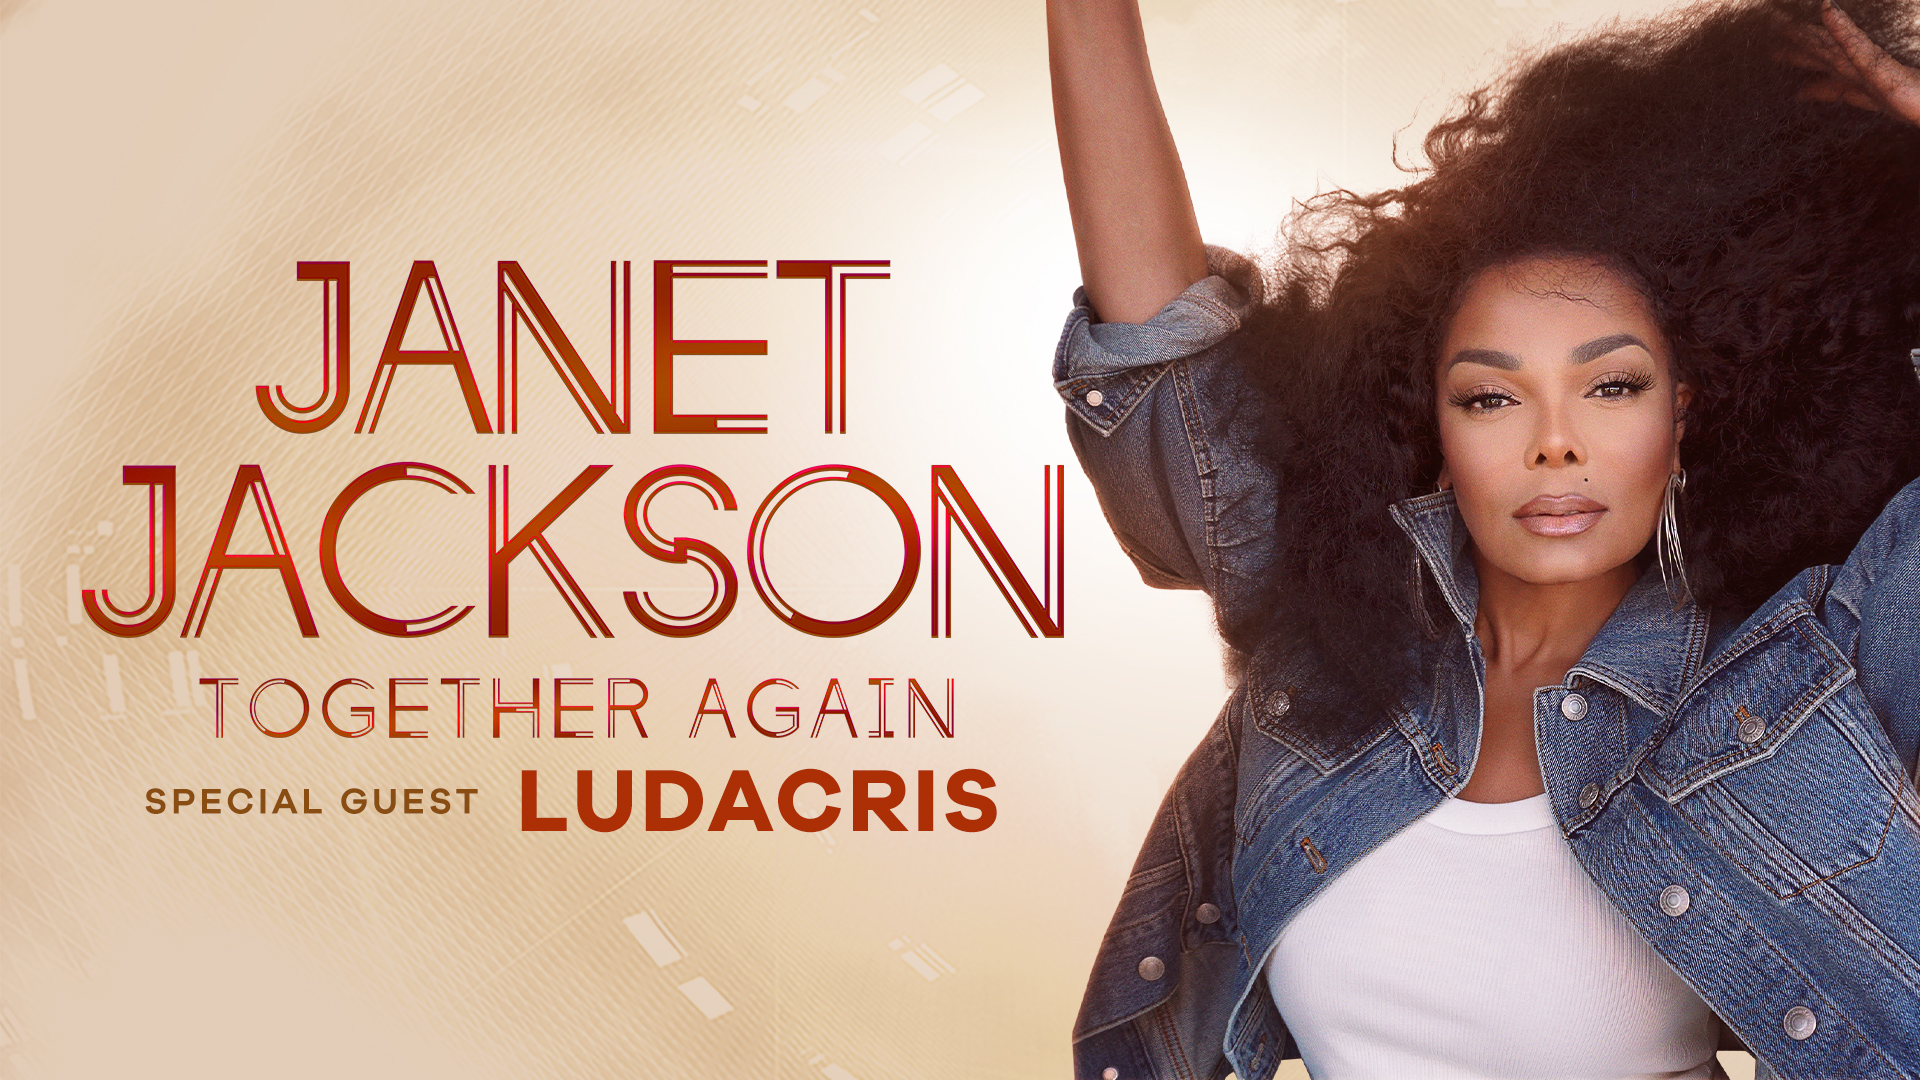 Janet Jackson "Together Again" Tour